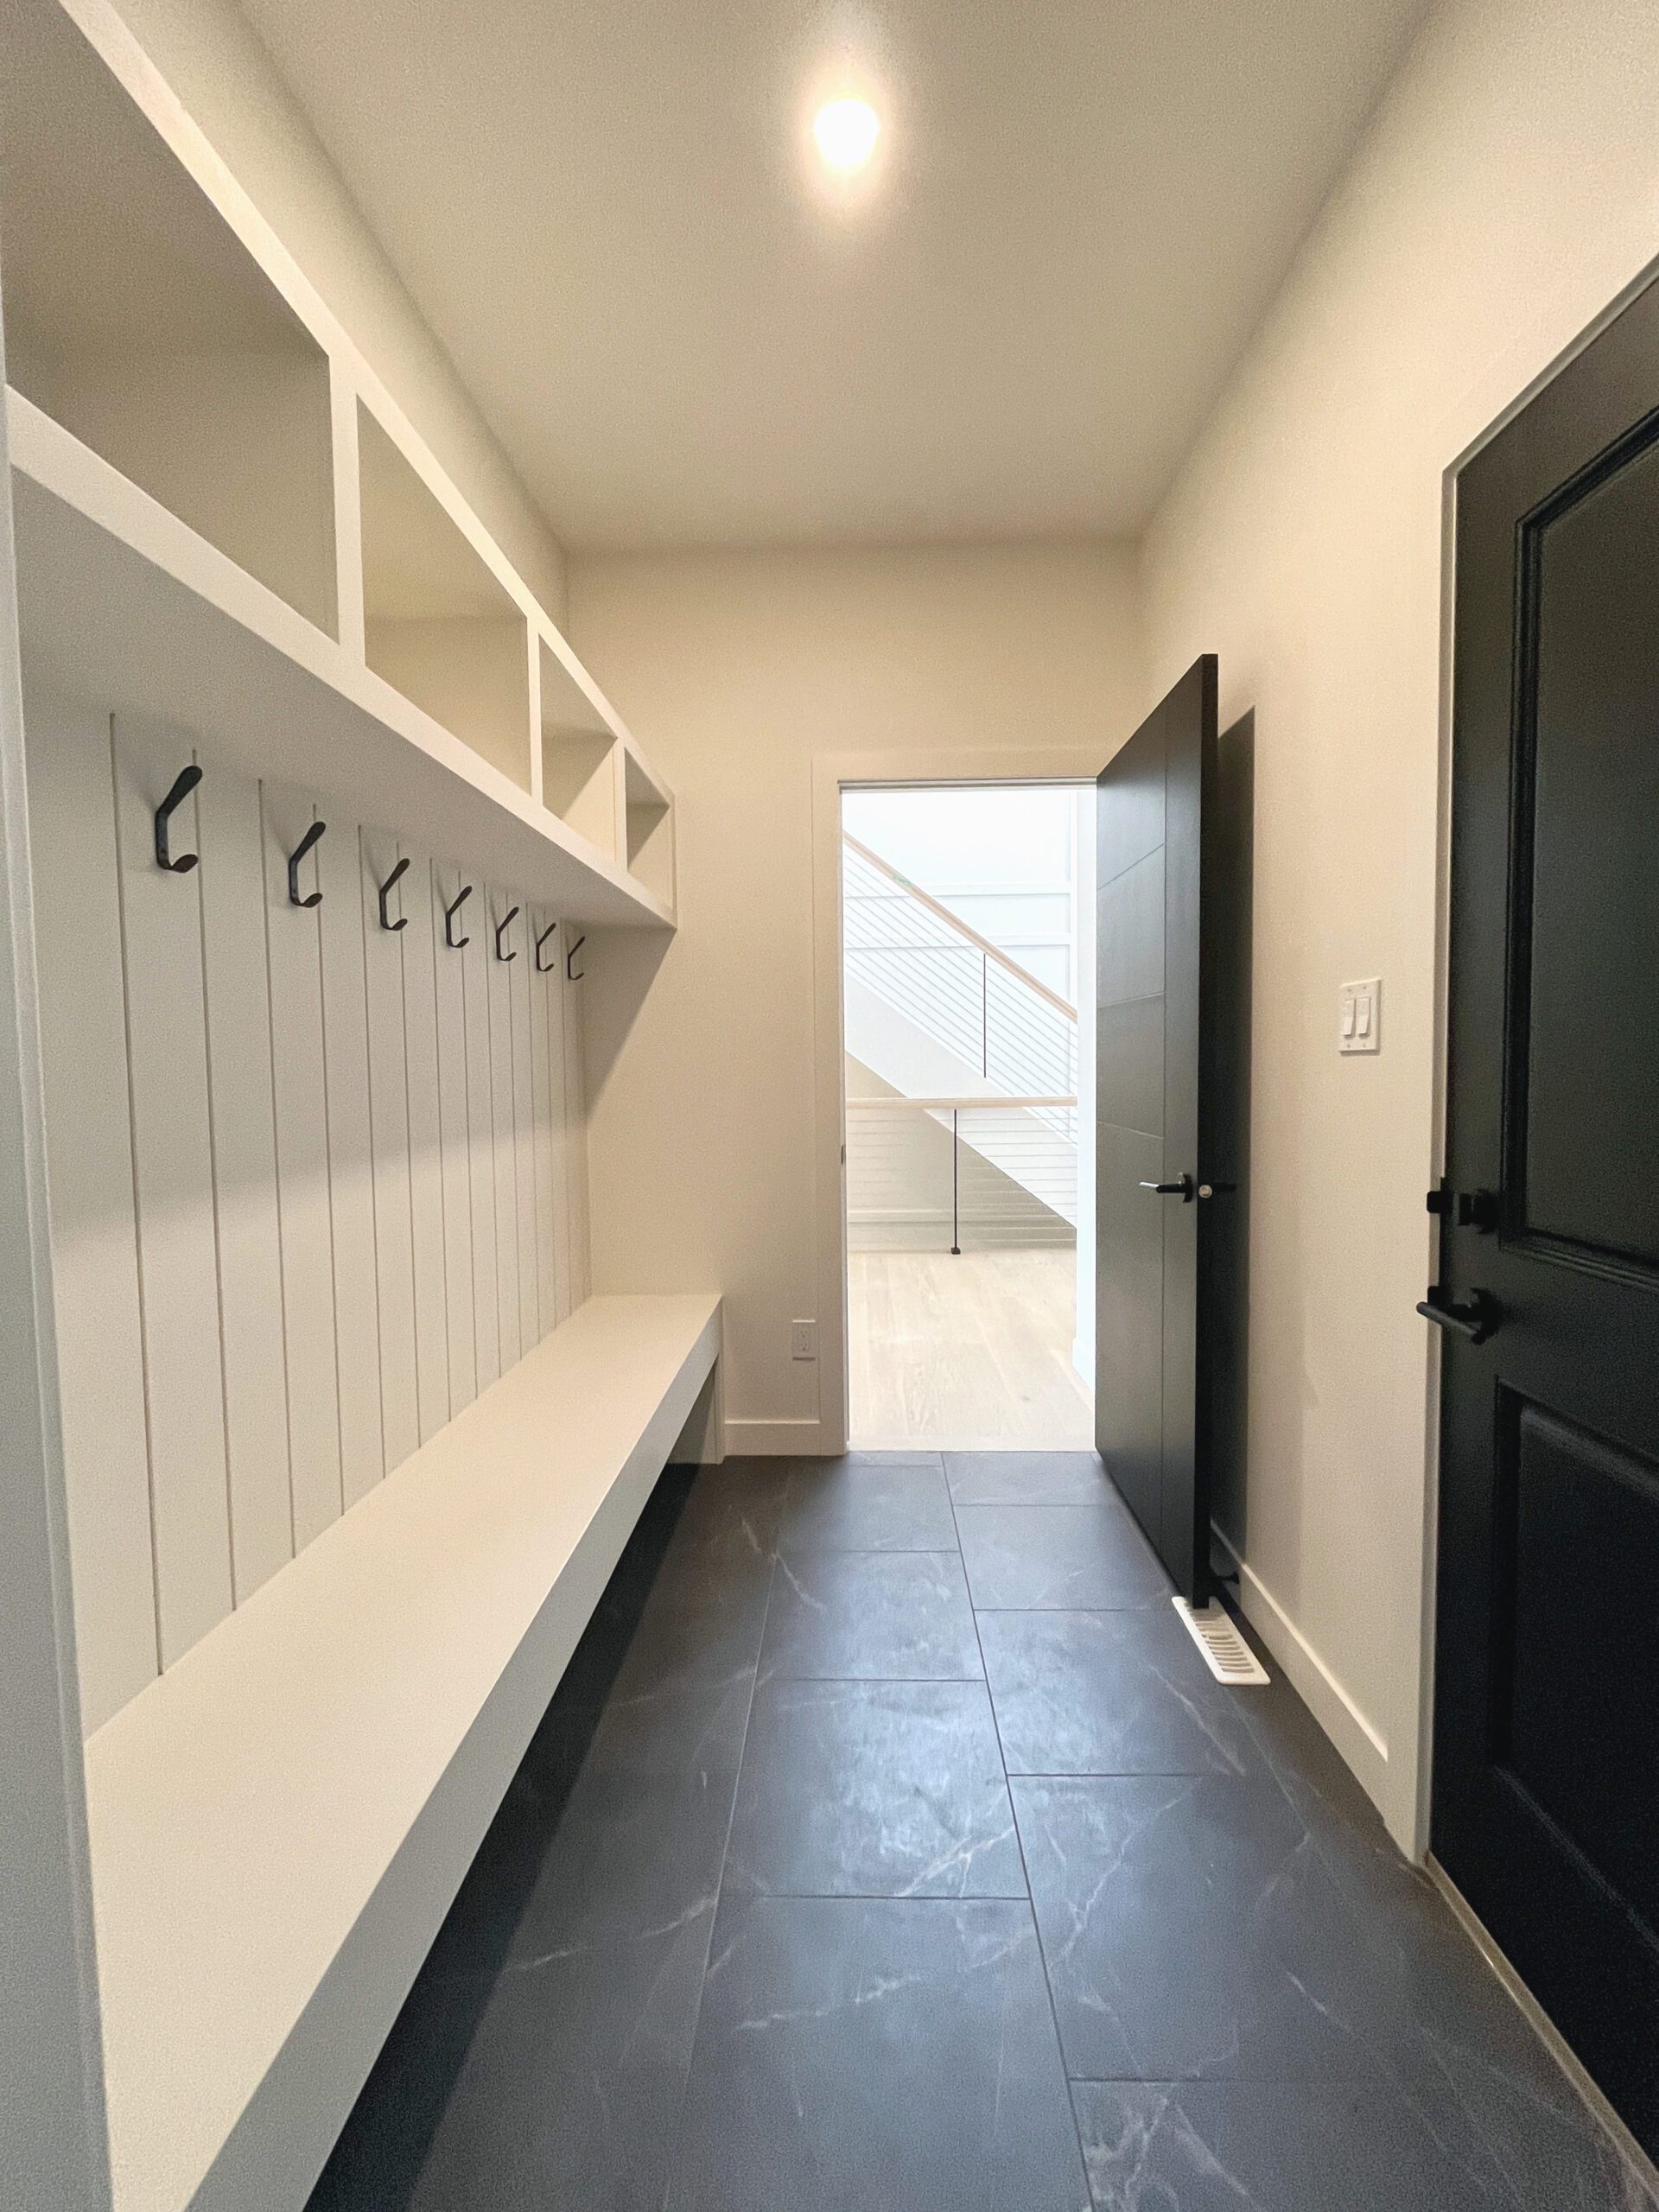 The mudroom with a black door and white shelves.